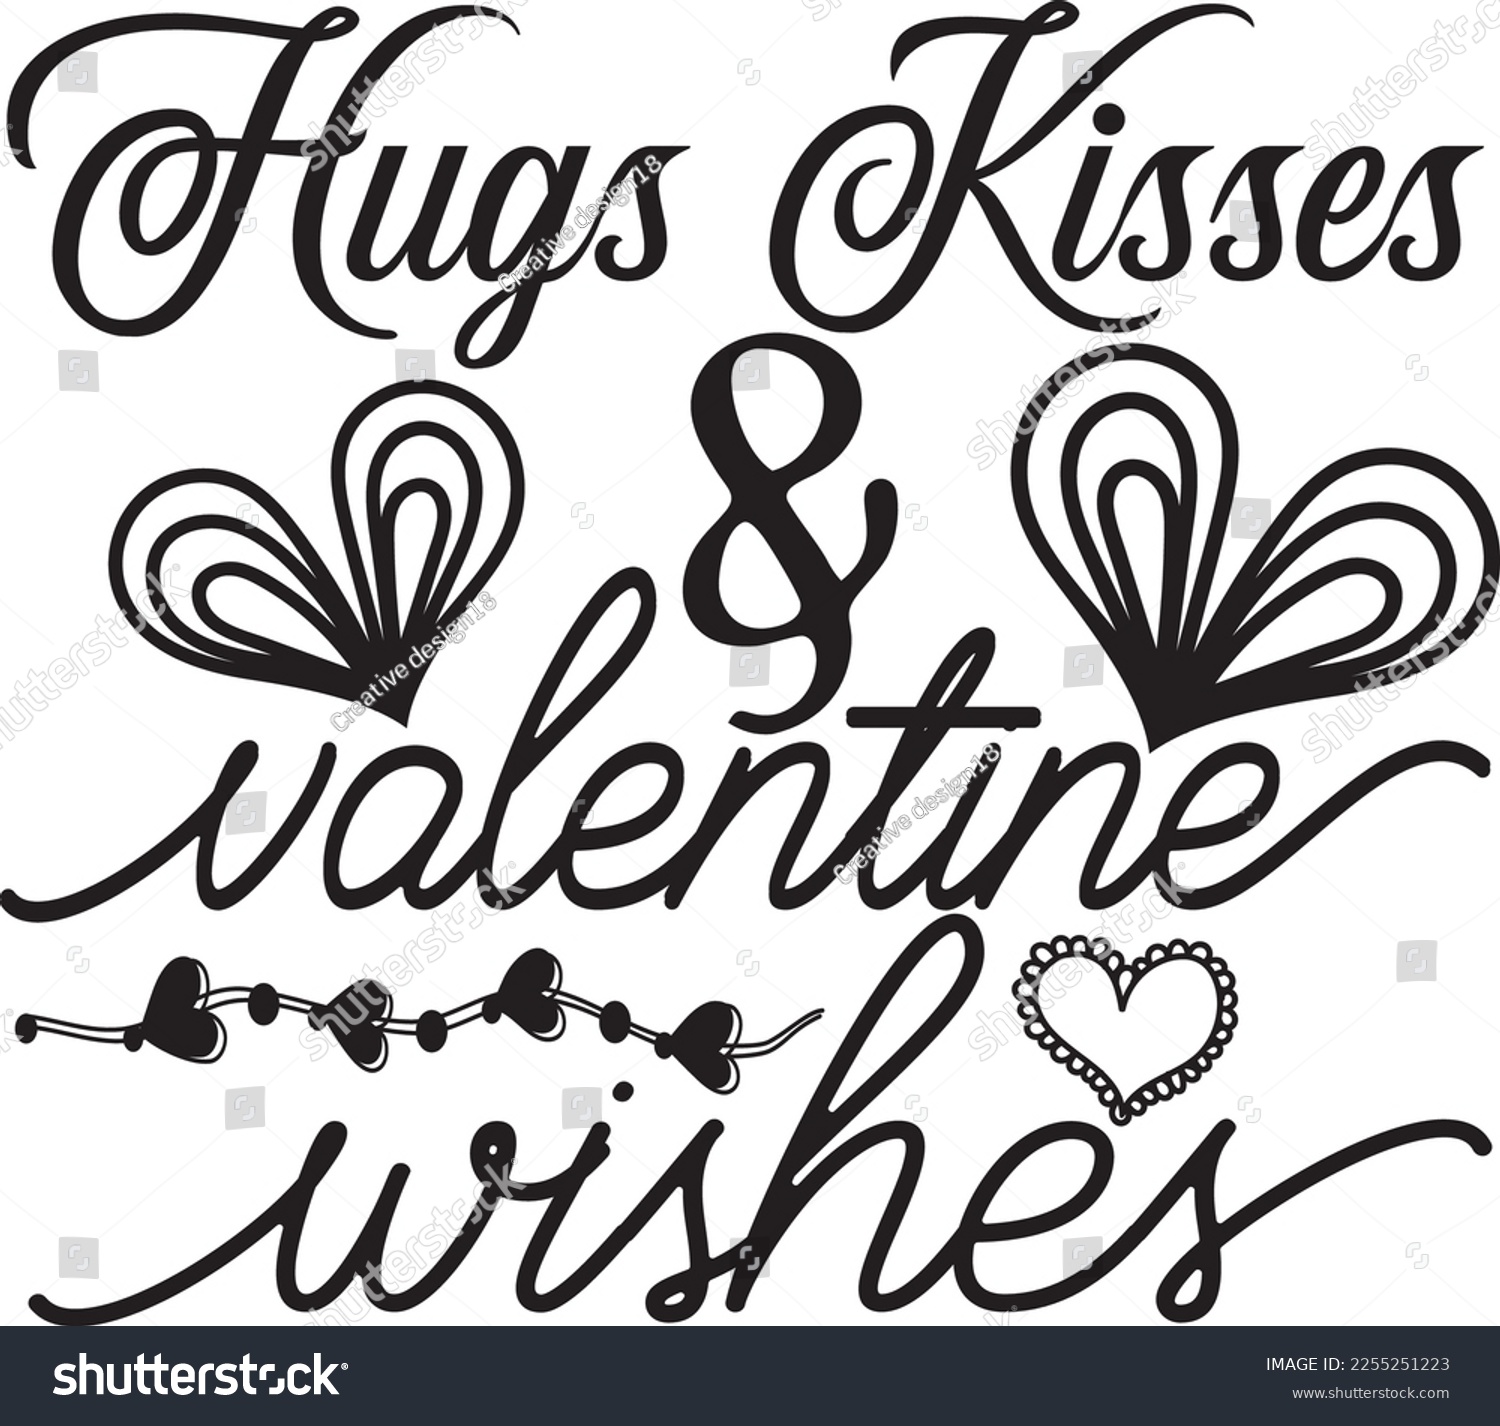 SVG of 
Hugs Kisses and valentine wishes svg